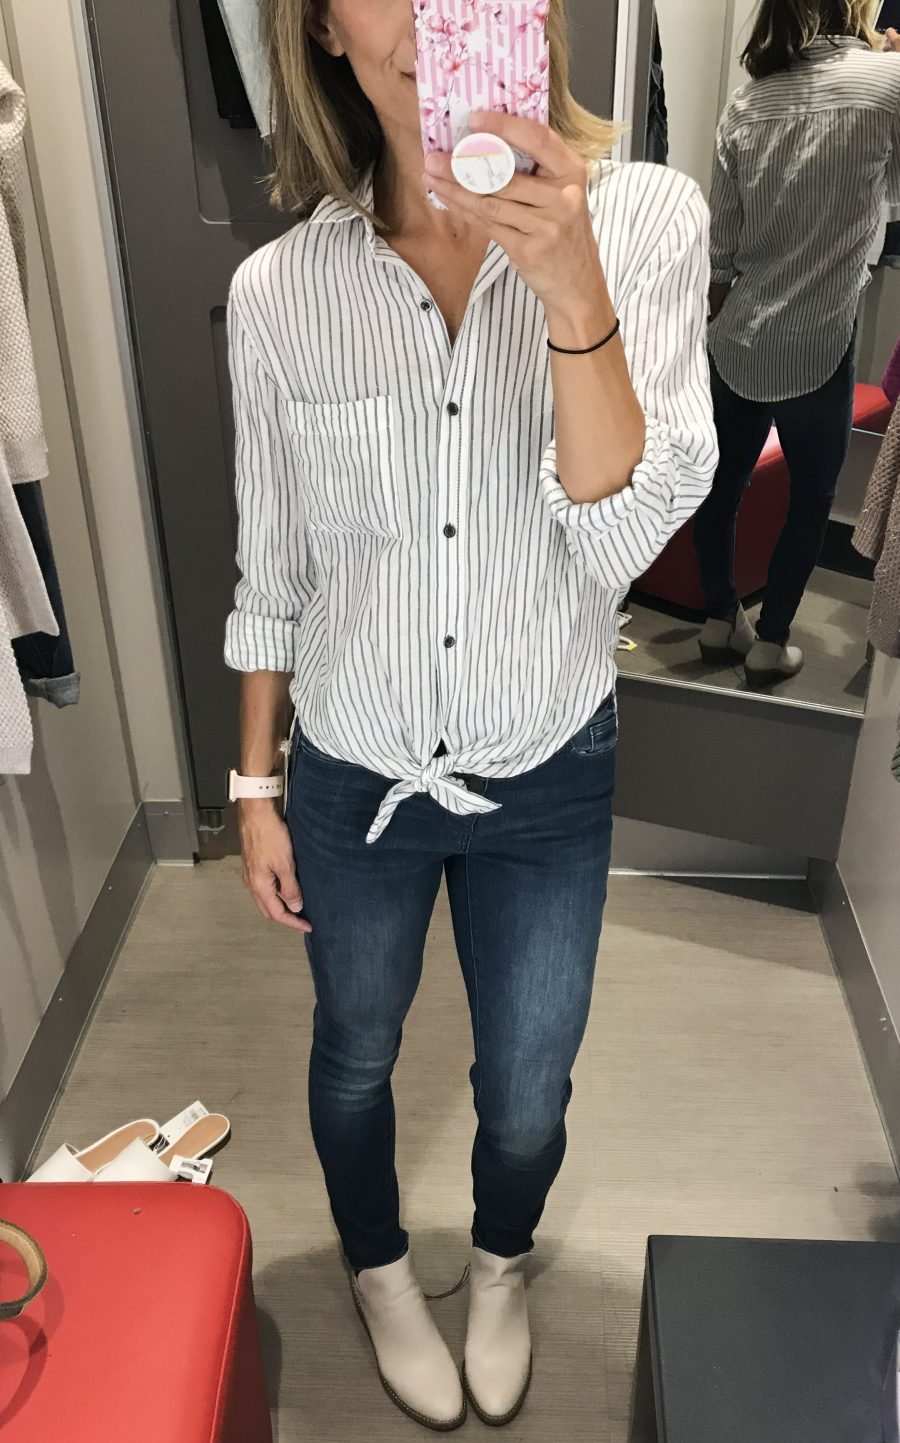 Target fall try on, button down shirt, jeans, booties